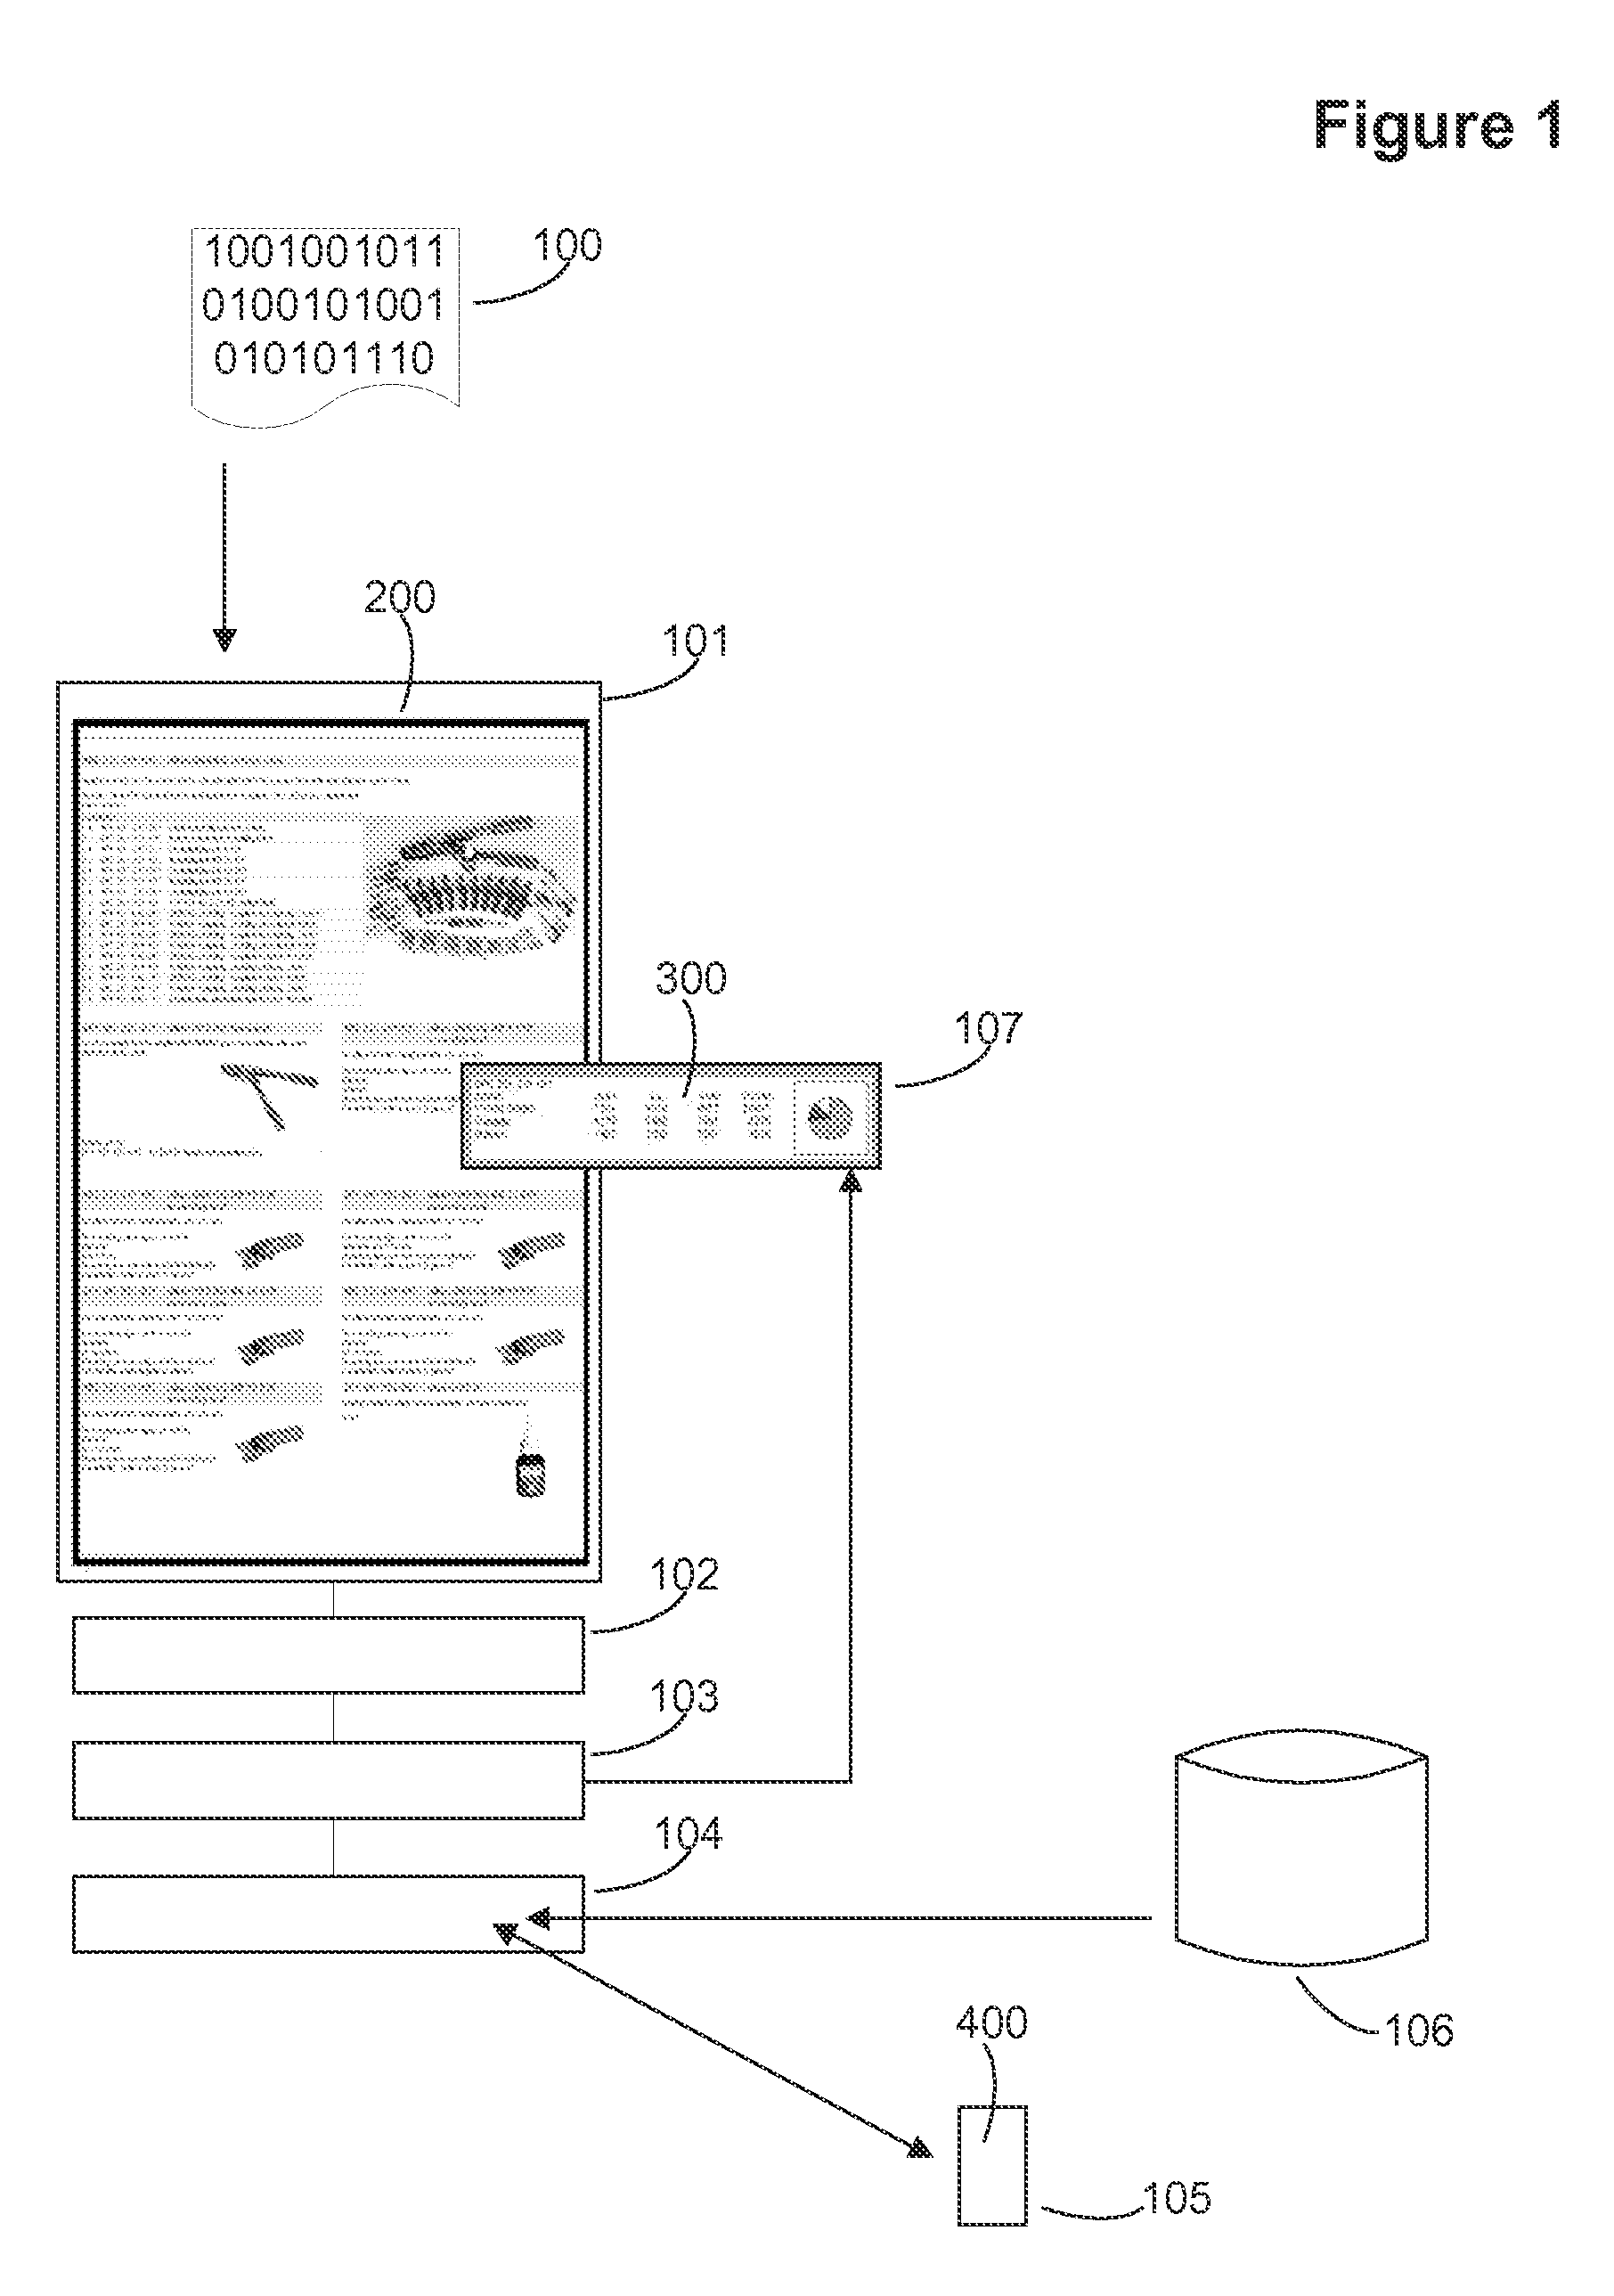 System and method for relating unstructured data in portable document format to external structured data